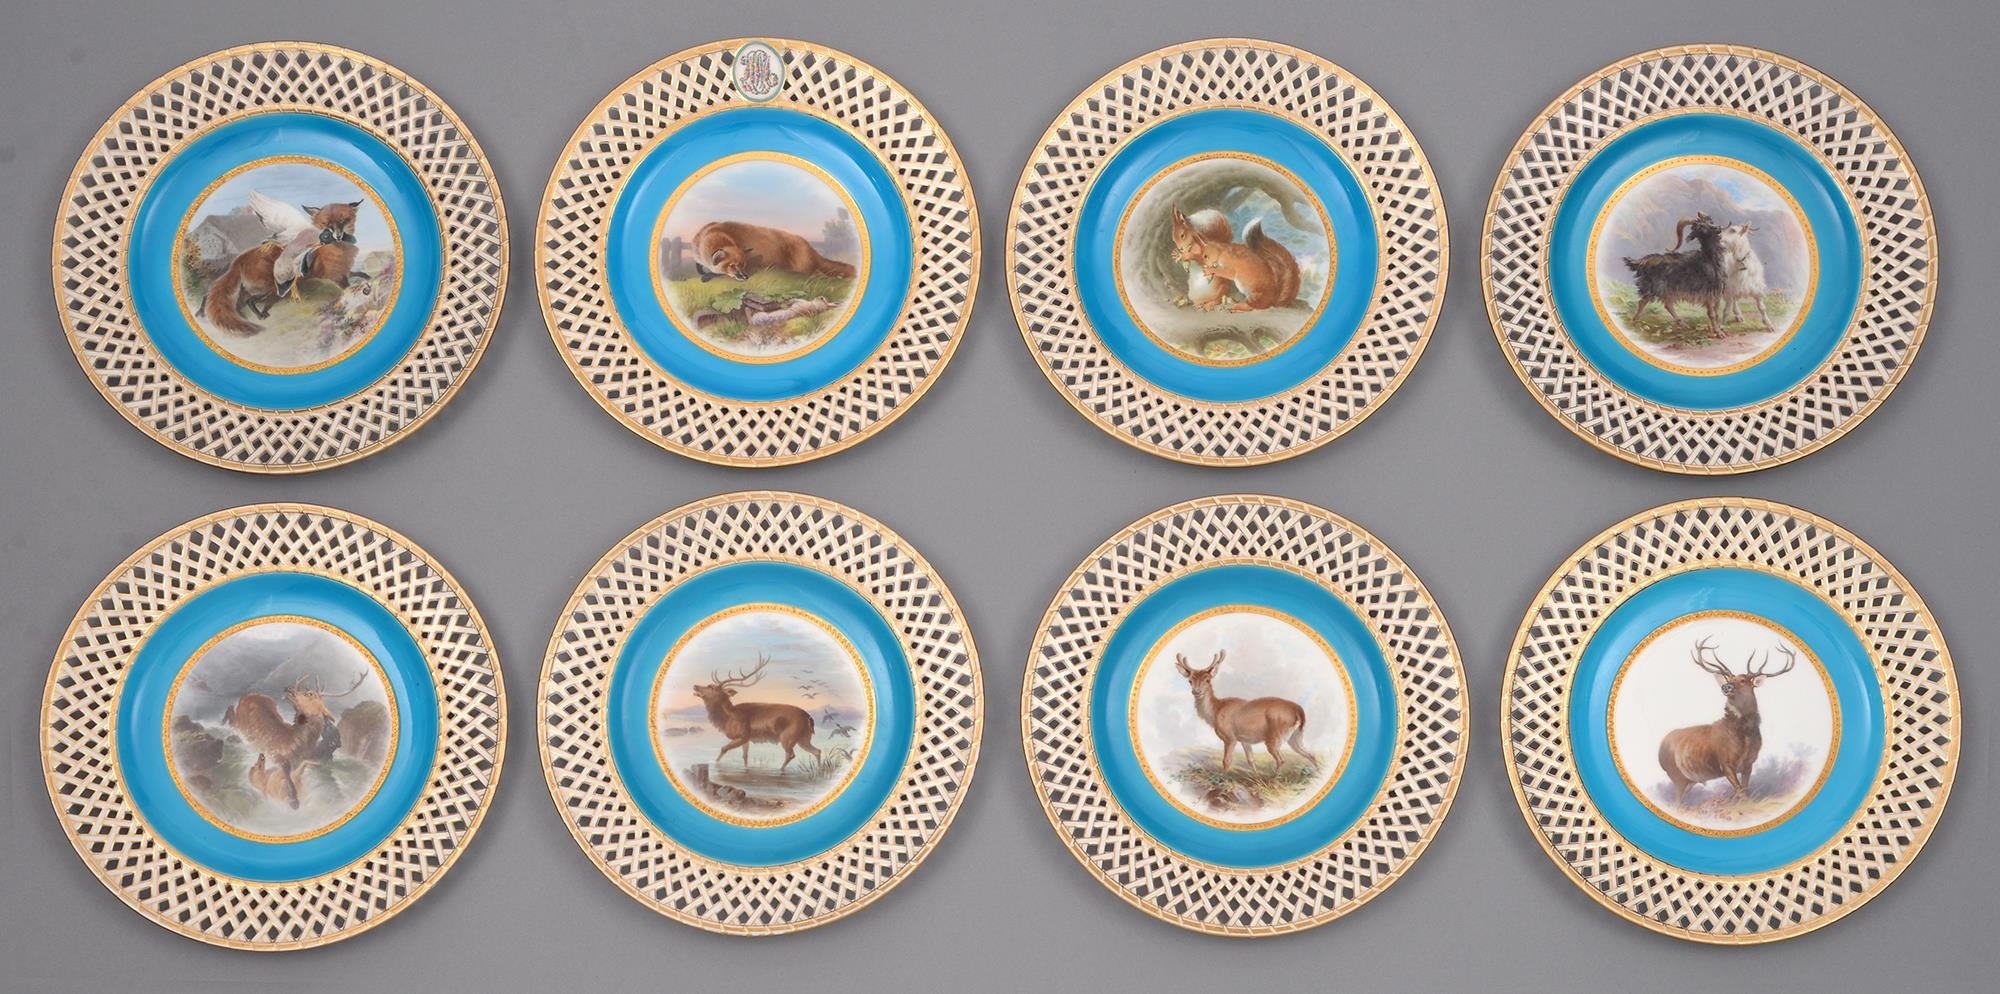 Eight Minton dessert plates painted with Landseer subjects, 1871, 1877 and circa, each with a